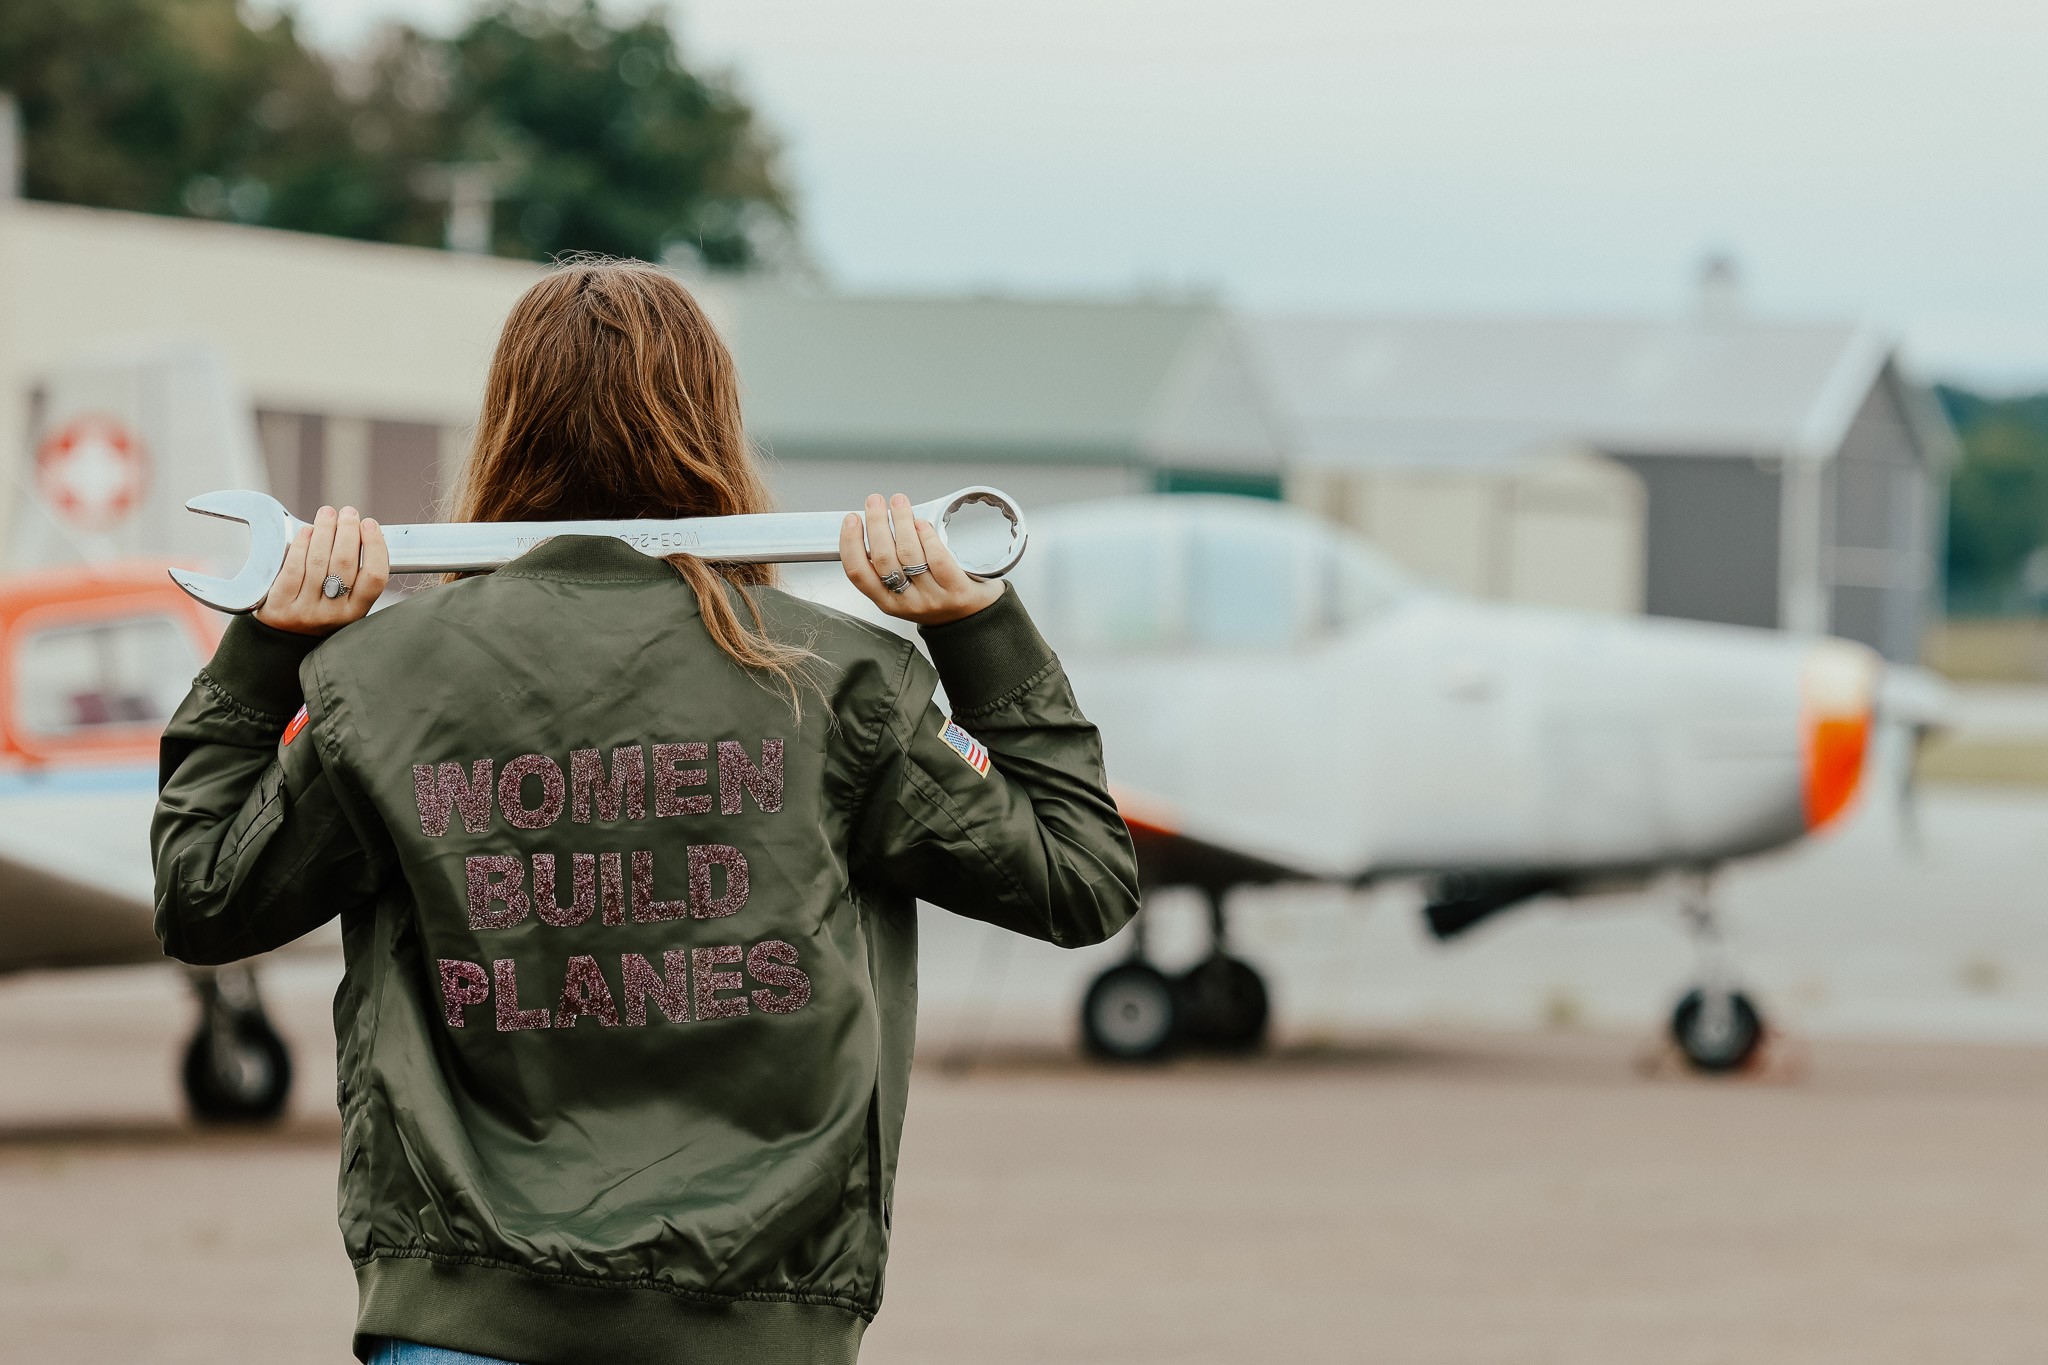 A woman in a flight jacket standing in front of a plane with a wrench over her shoulder.